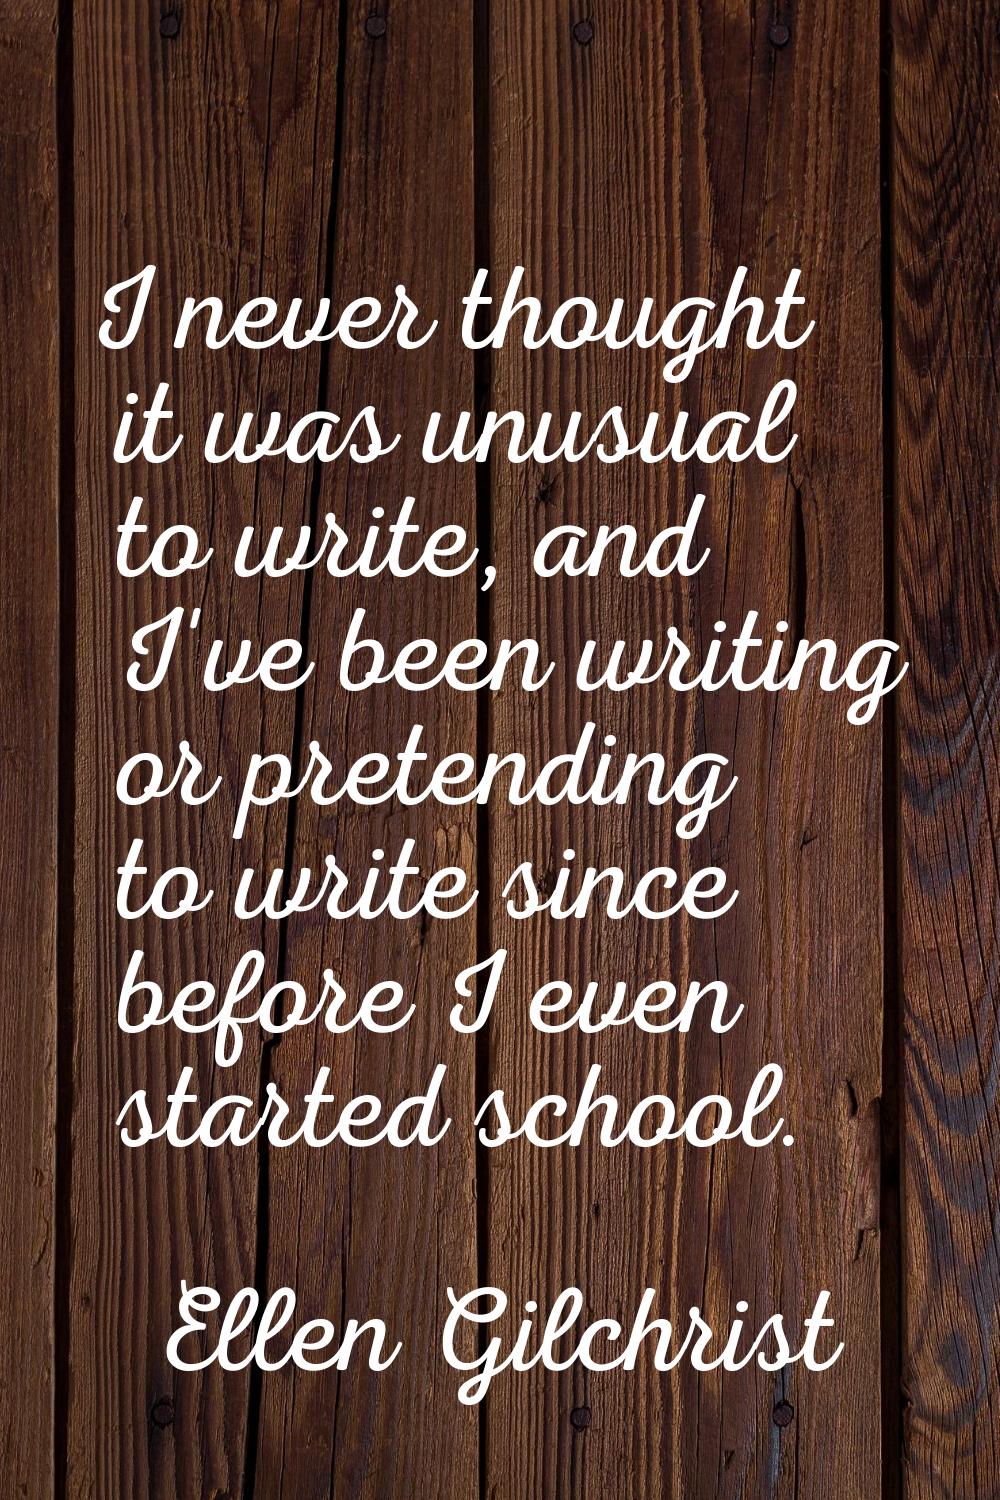 I never thought it was unusual to write, and I've been writing or pretending to write since before 